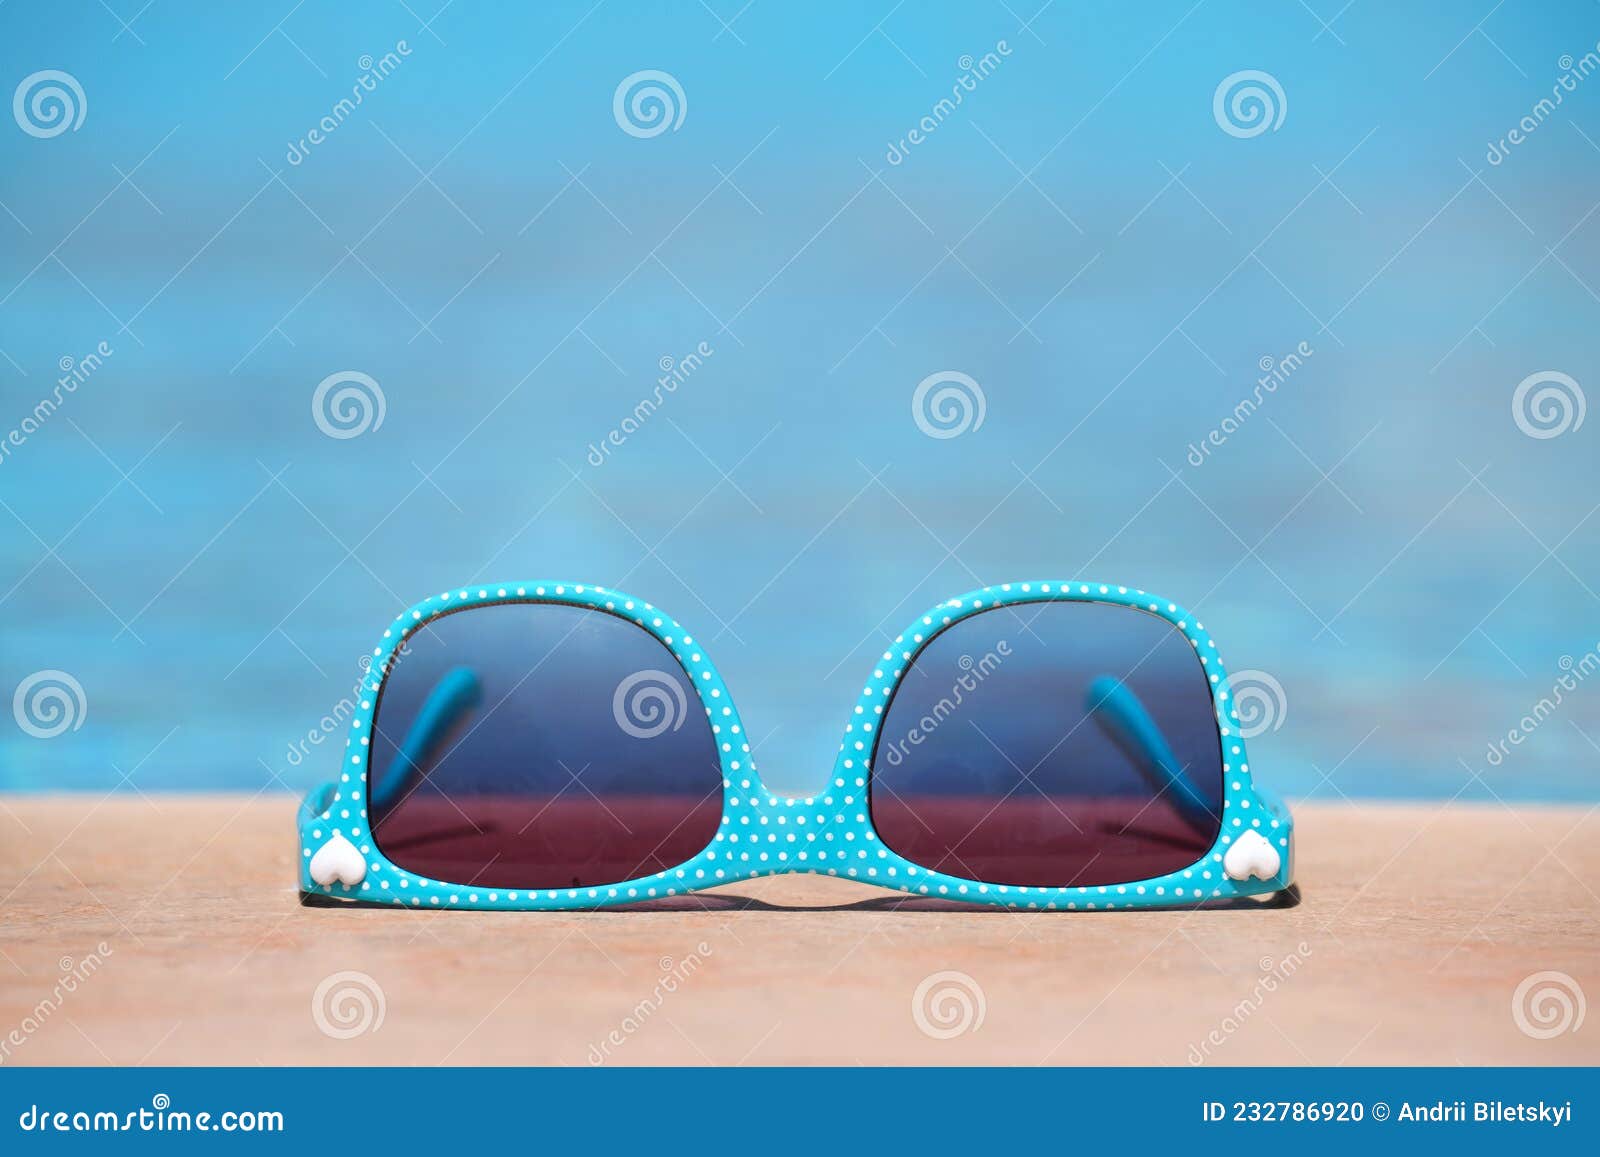 Closeup of Blue Sunglasses on Swimming Pool Side on Warm Sunny Day ...